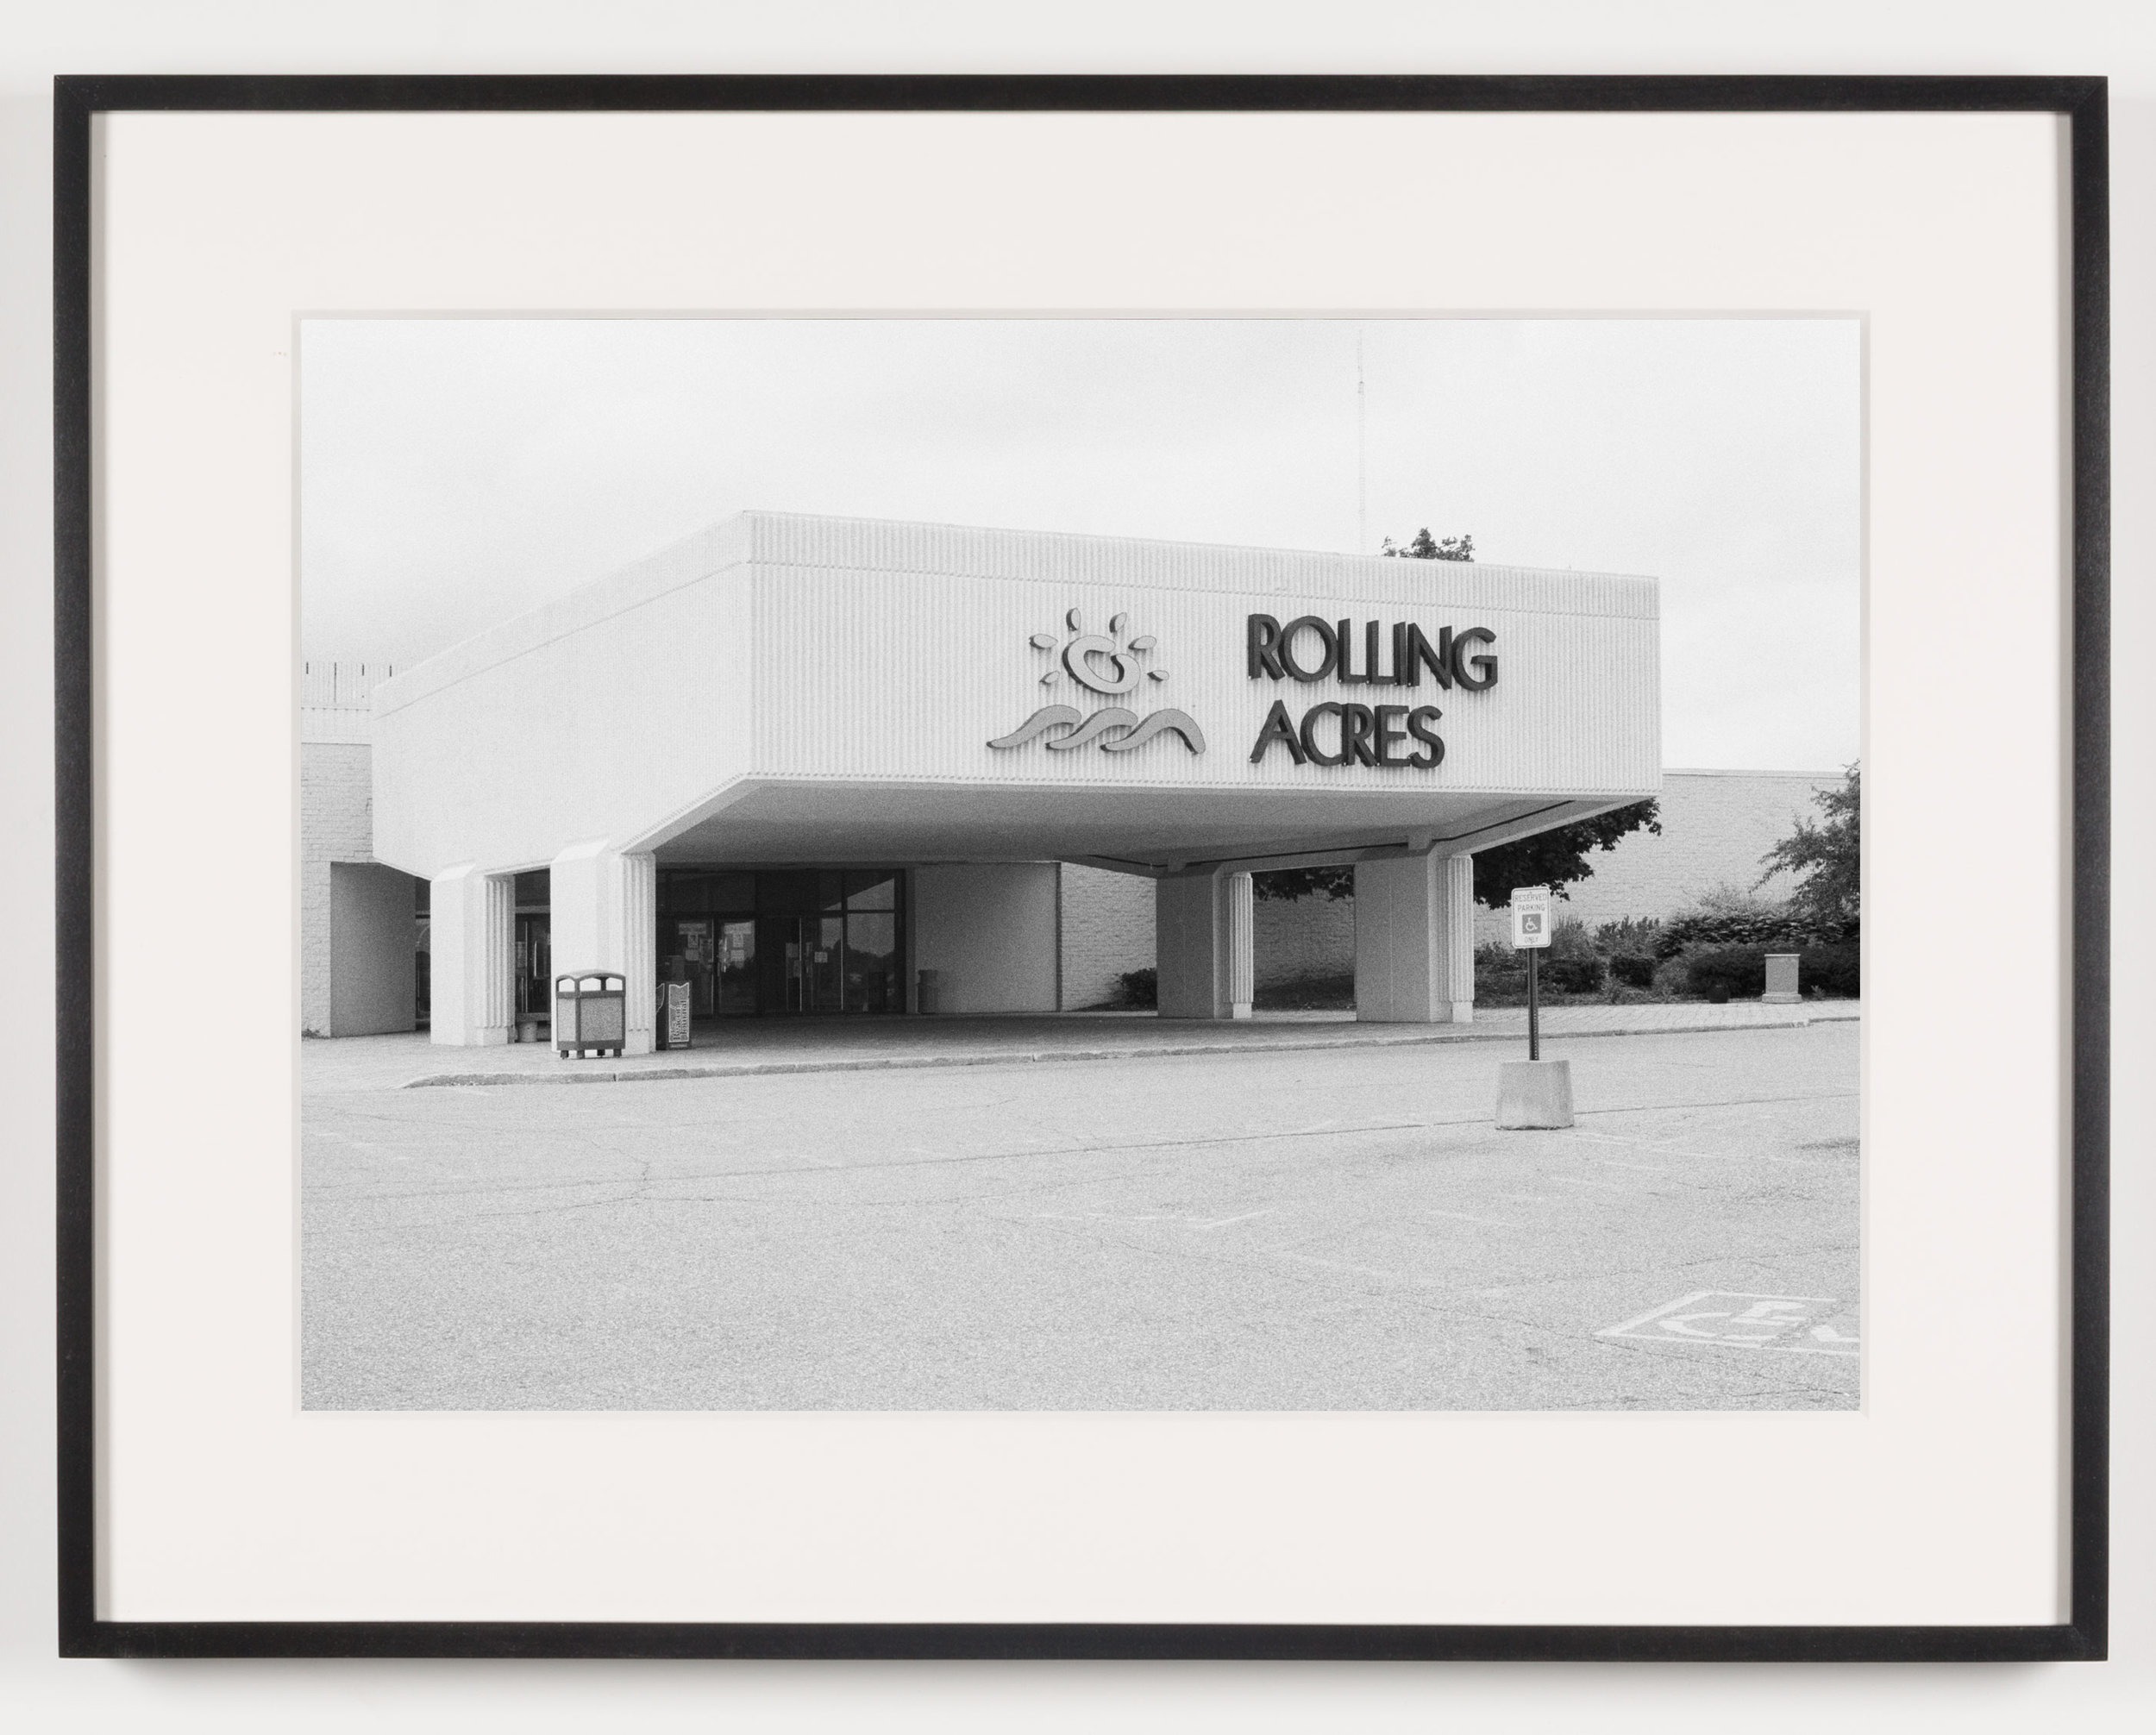   Rolling Acres Mall (View of Main Entrance) Akron, OH, Est. 1975   2011  Epson Ultrachrome K3 archival ink jet print on Hahnemühle Photo Rag paper  21 5/8 x 28 1/8 inches   American Passages, 2001–2011    A Diagram of Forces, 2011     